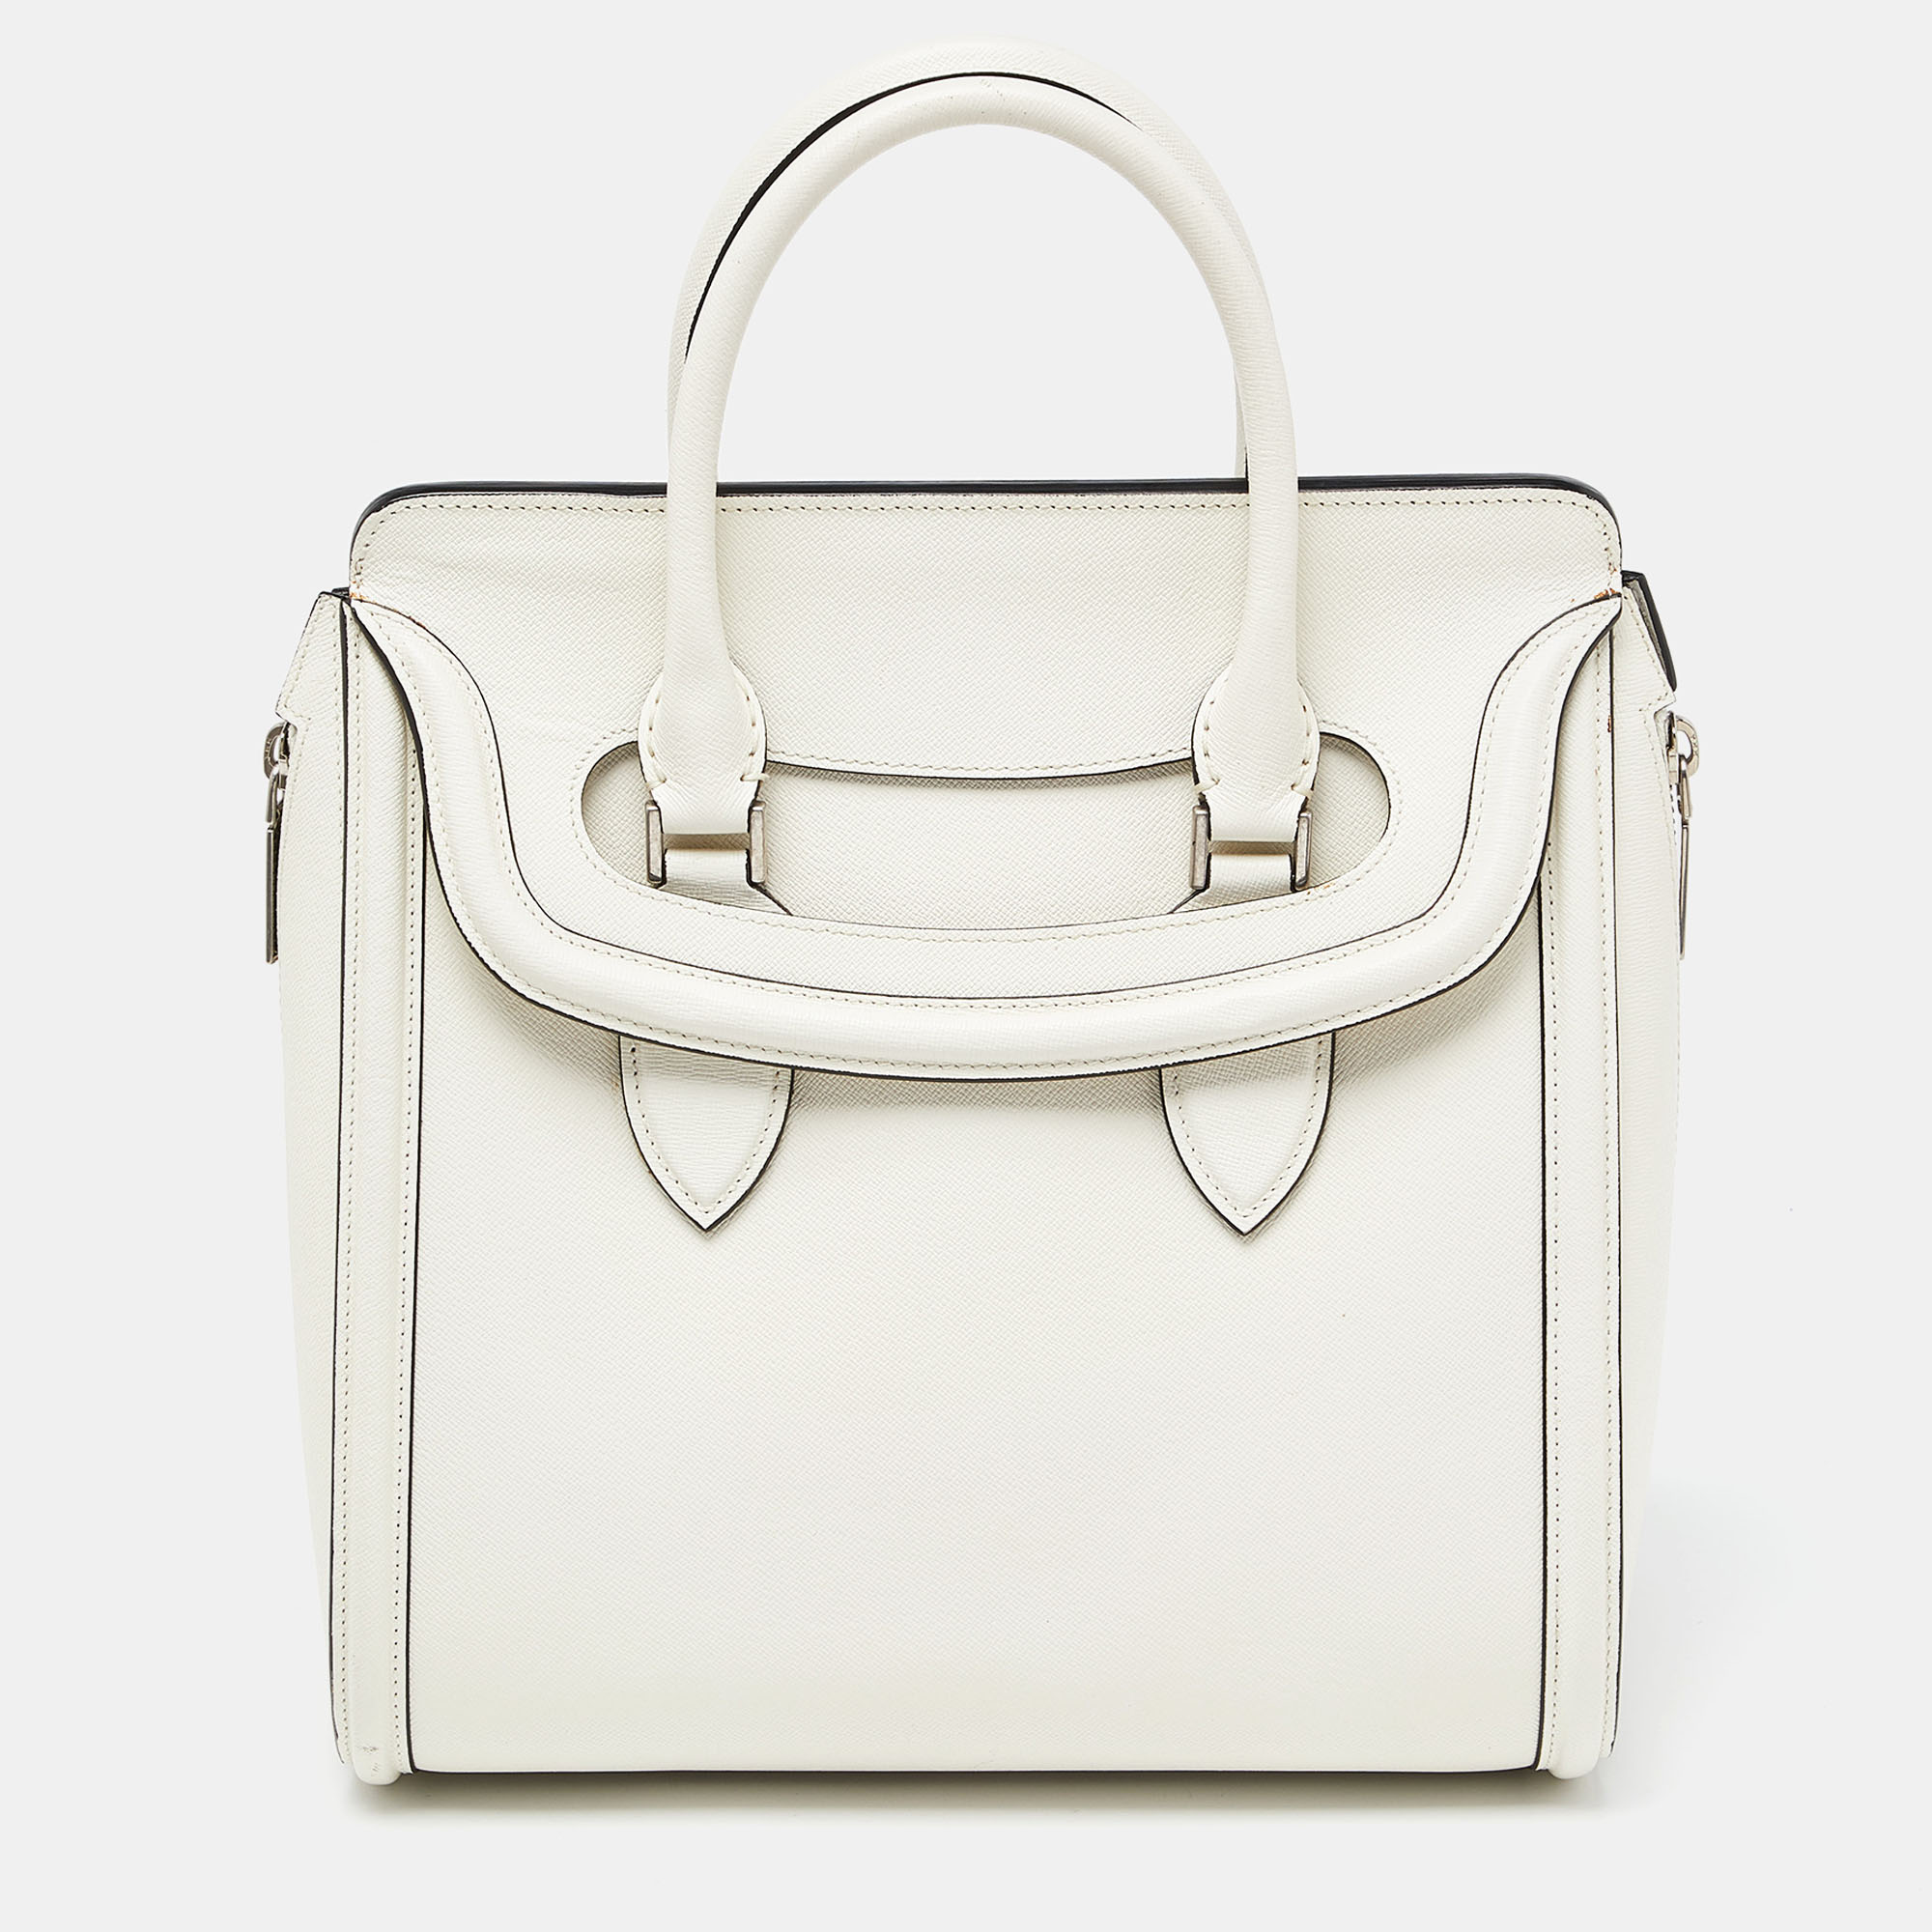 This classy bag from the house of Alexander Mc Queen is lovely Crafted in elegant off white leather this Heroine bag displays a structured silhouette. It features two rolled top leather handles and a unique slide cover flap. The interior is roomy and is lined with suede.